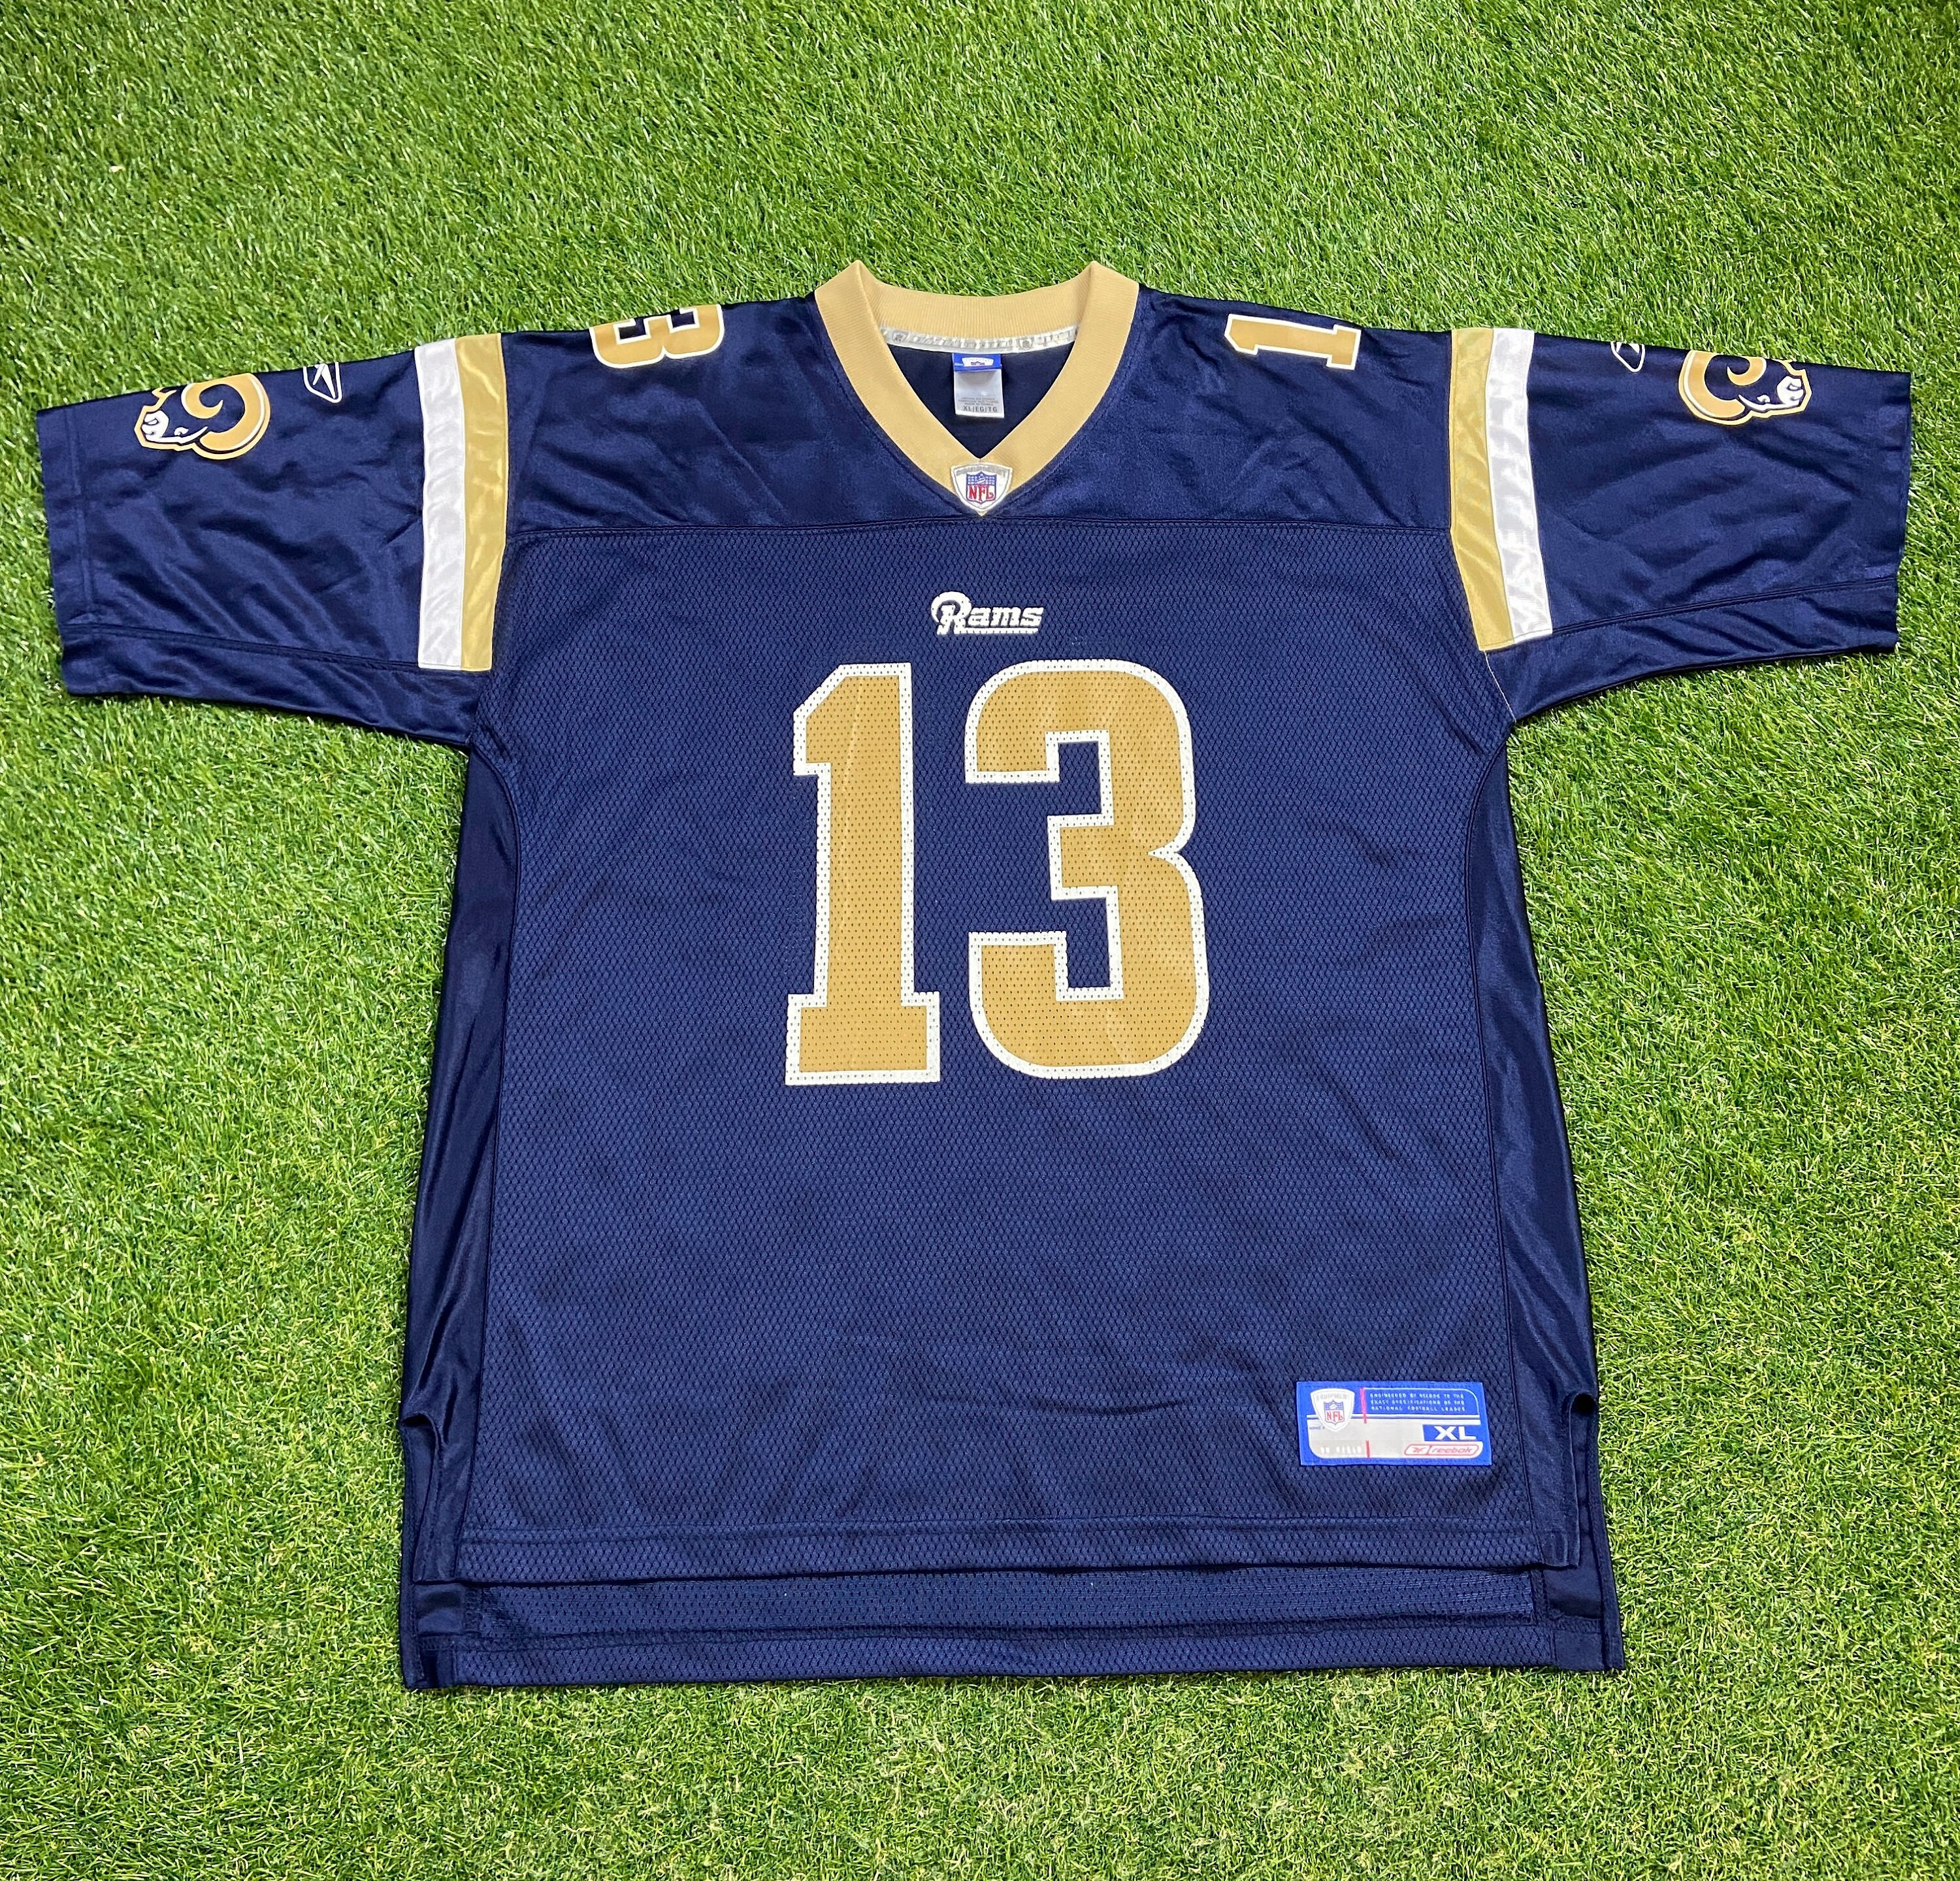 st louis rams old jersey